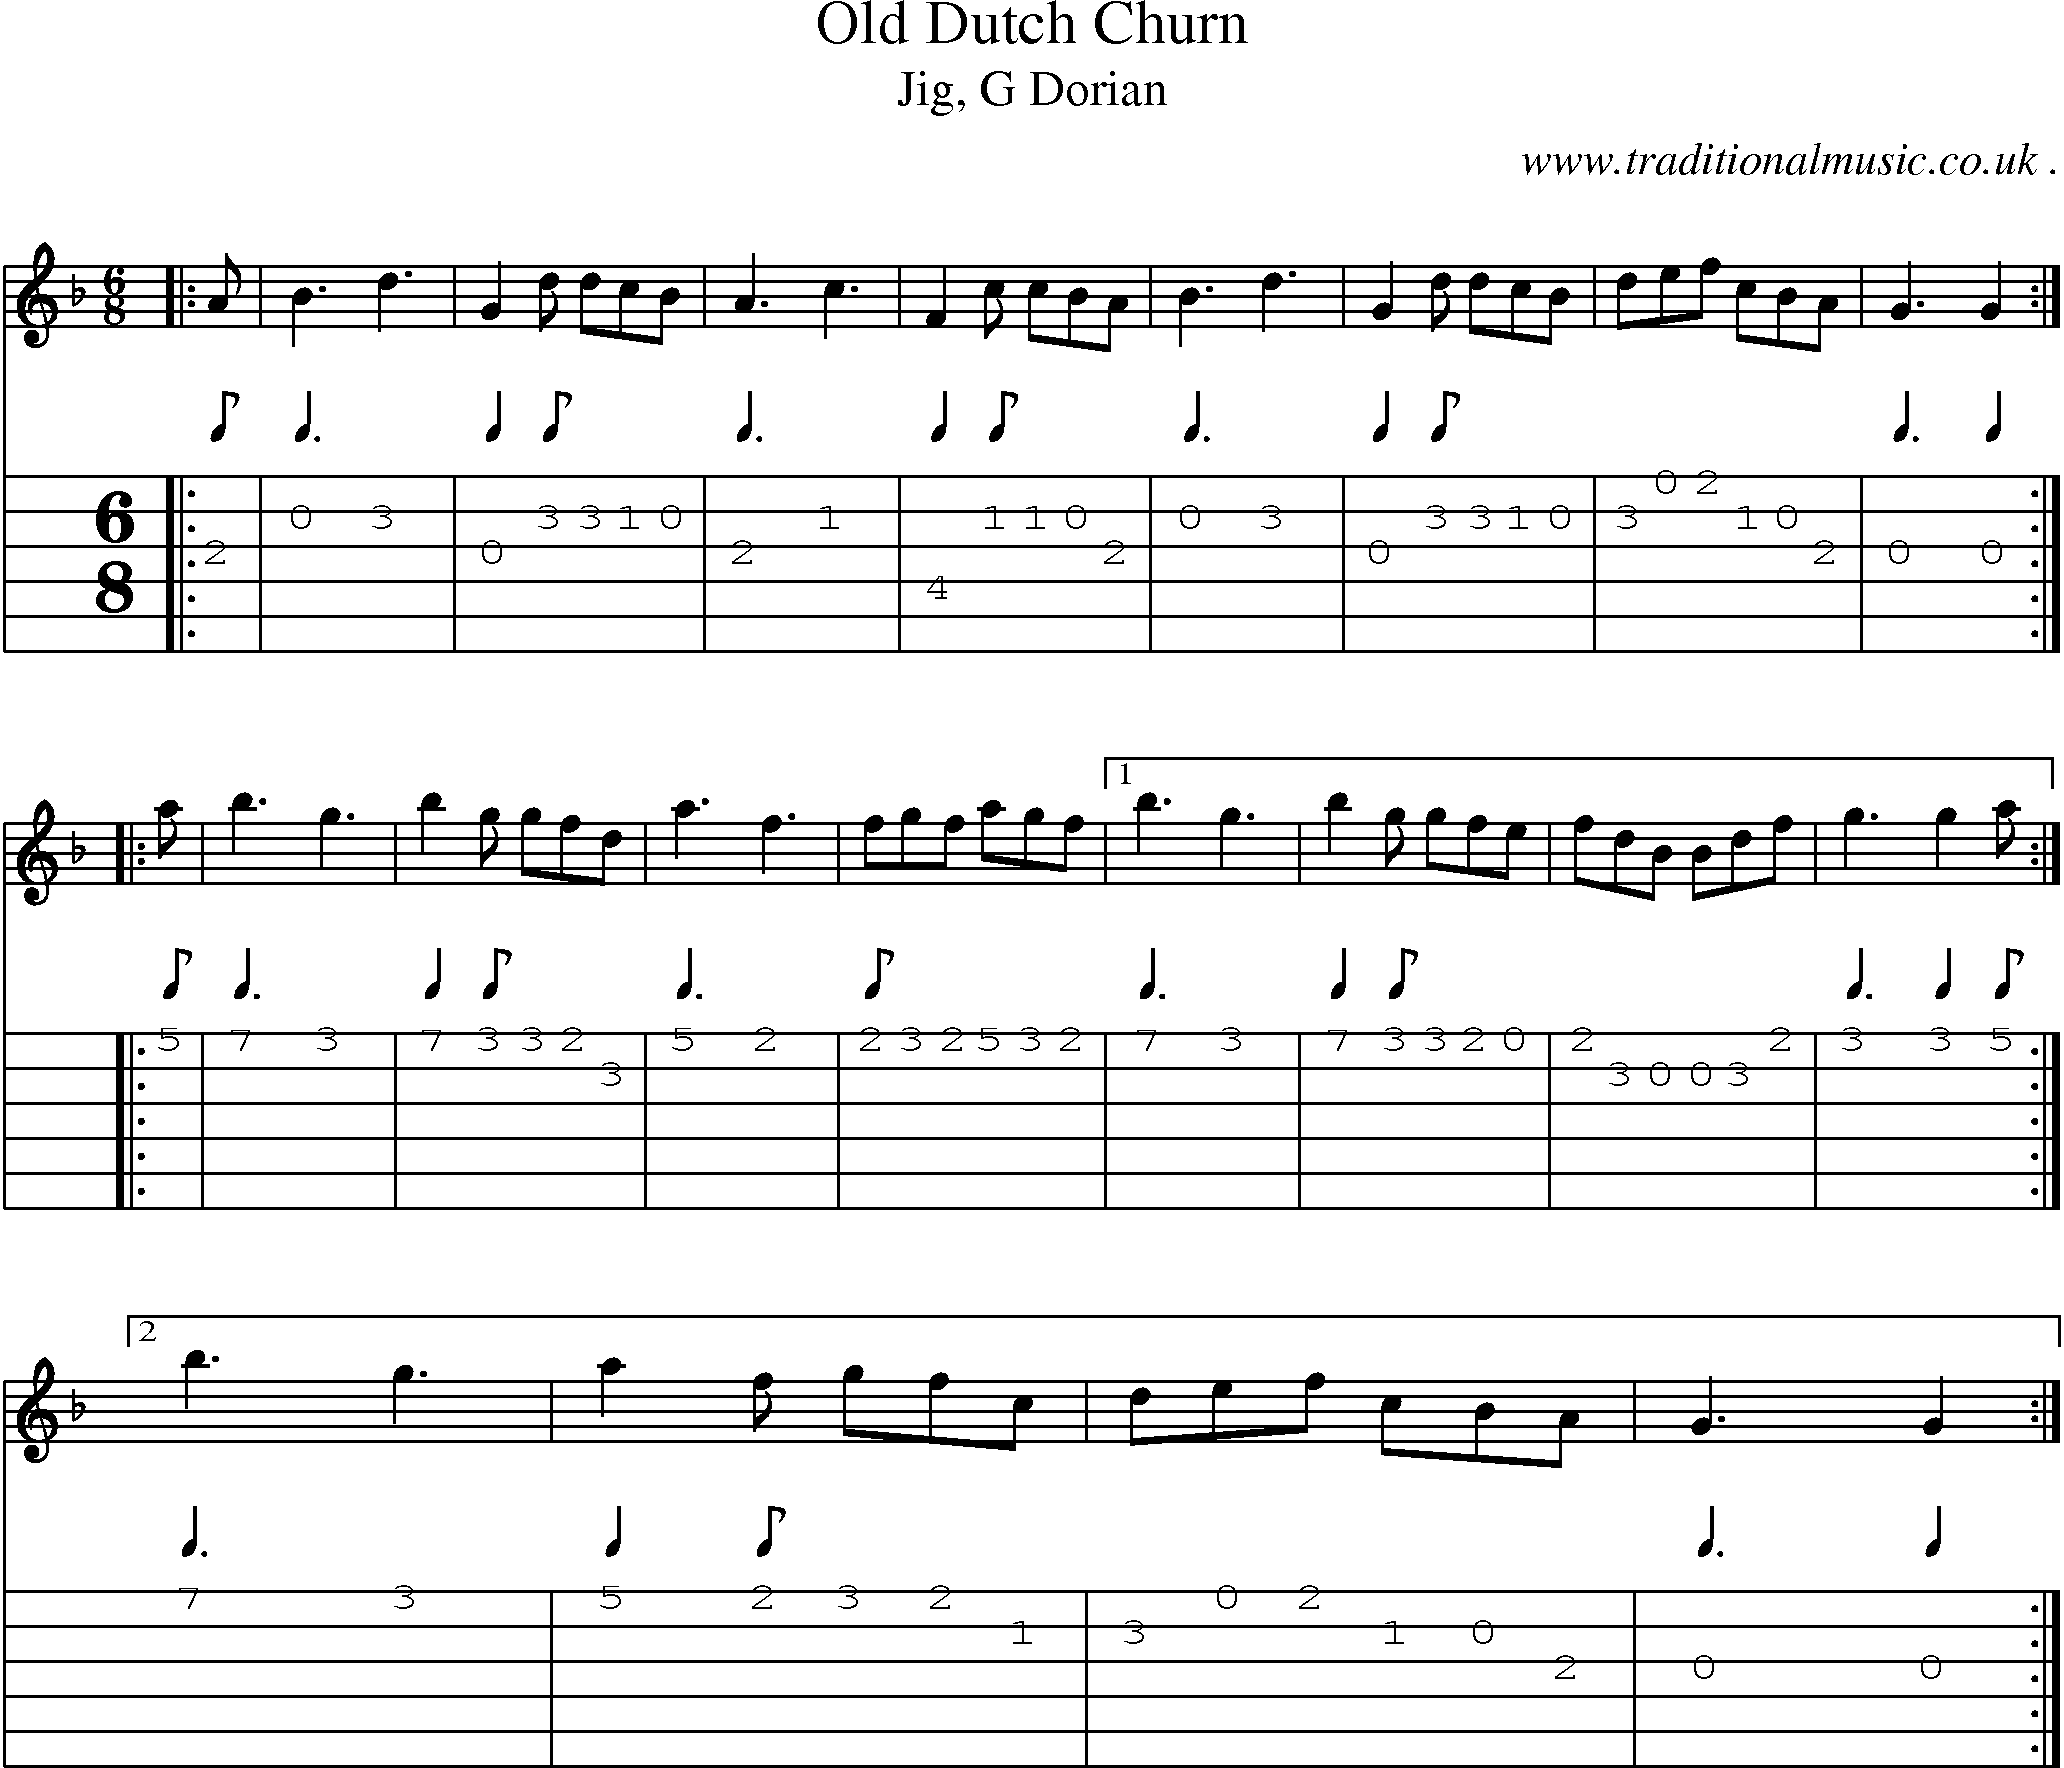 Sheet-music  score, Chords and Guitar Tabs for Old Dutch Churn